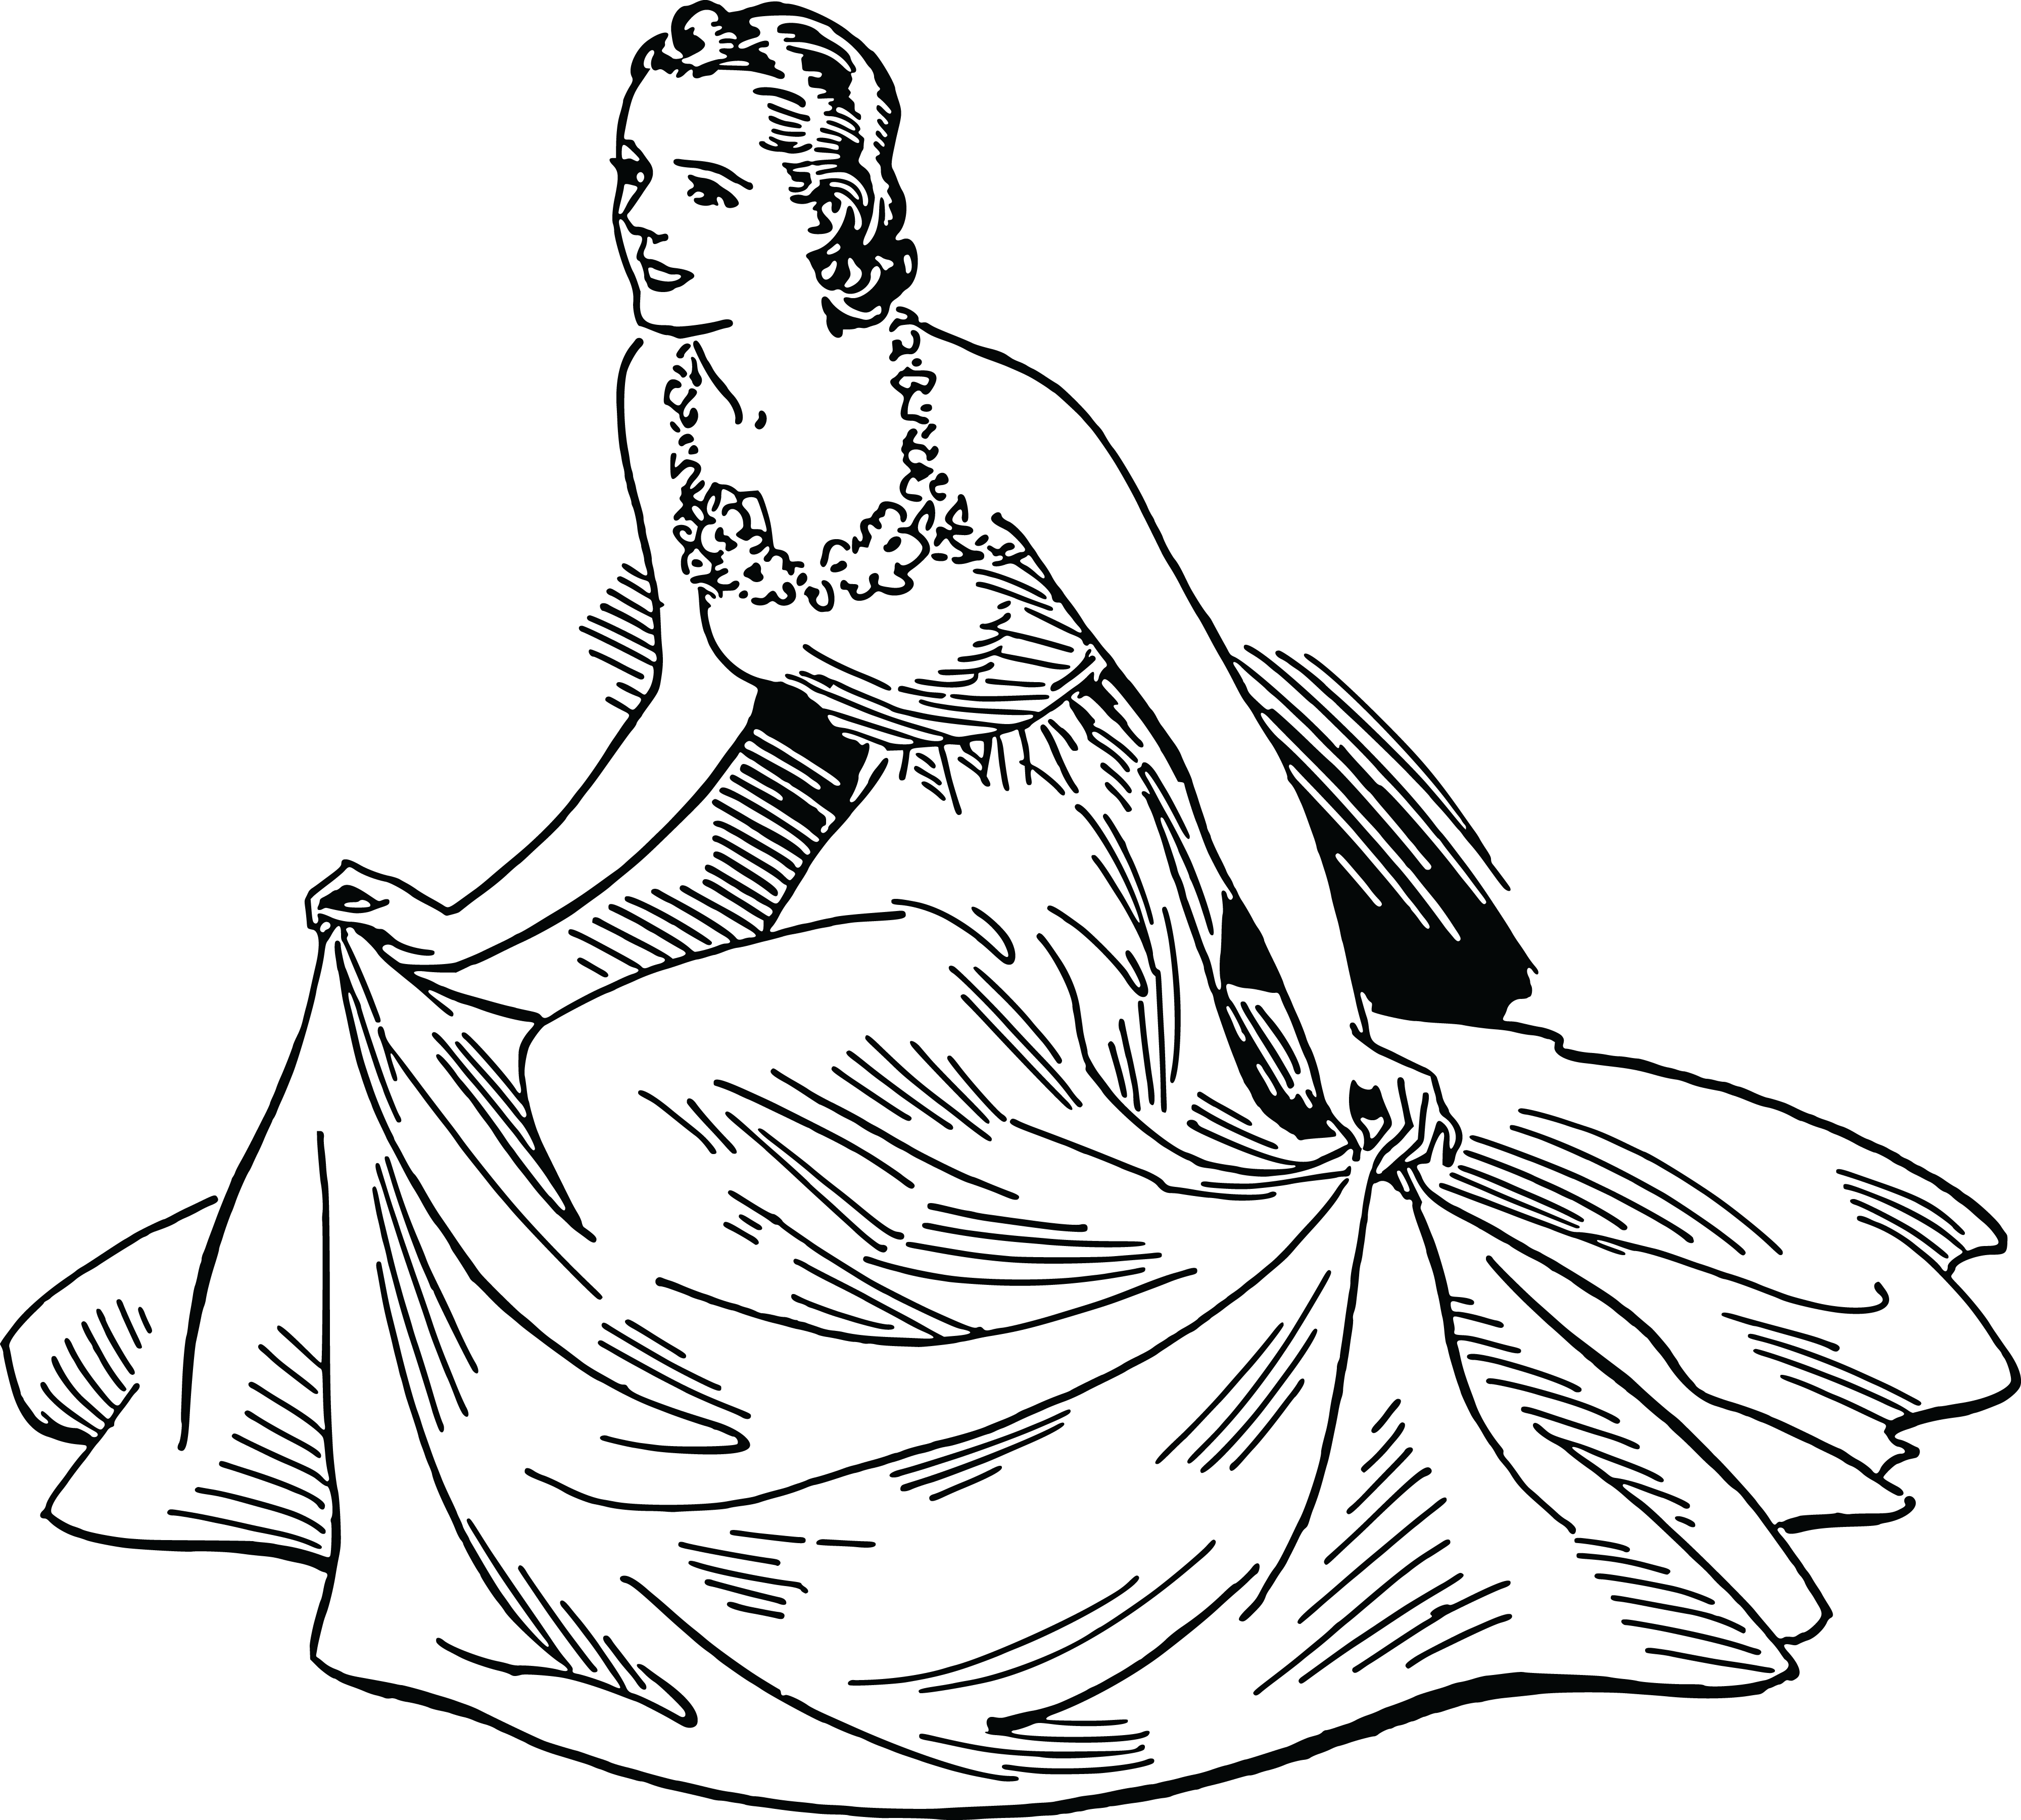 Dress clipart black and white, Dress black and white Transparent FREE